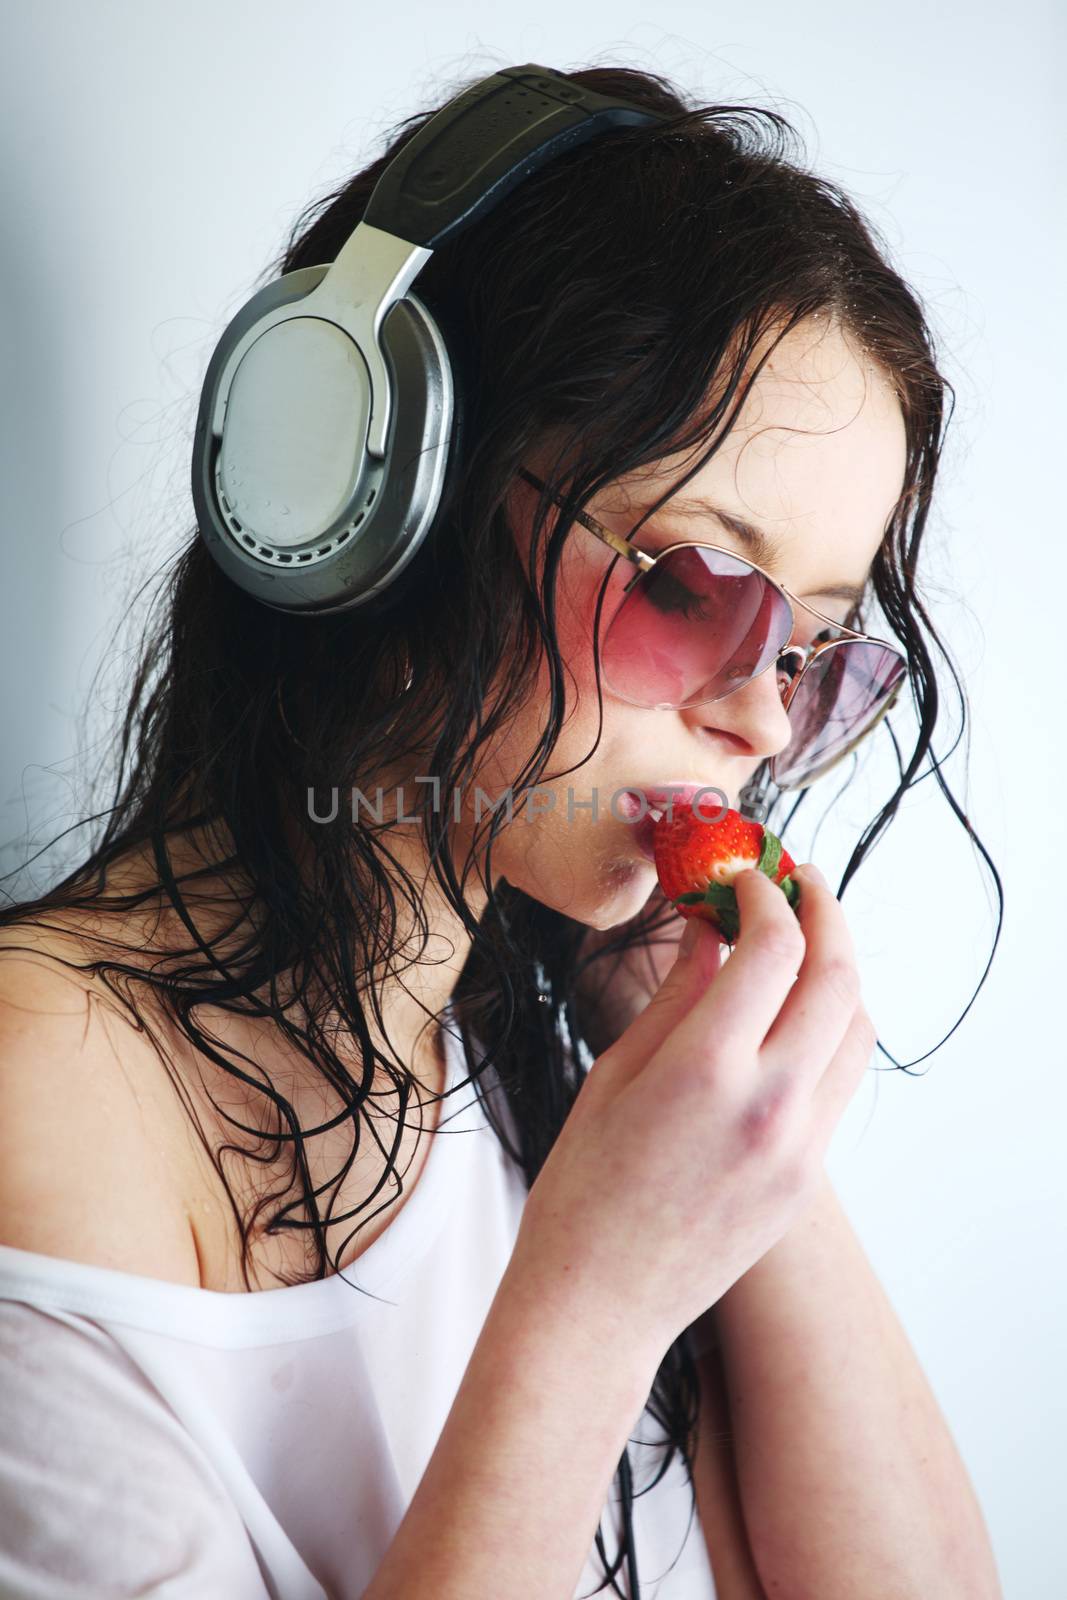 Young woman listening to music on headphones eating strawberry. Closeup portrait of girl on light background with copy space